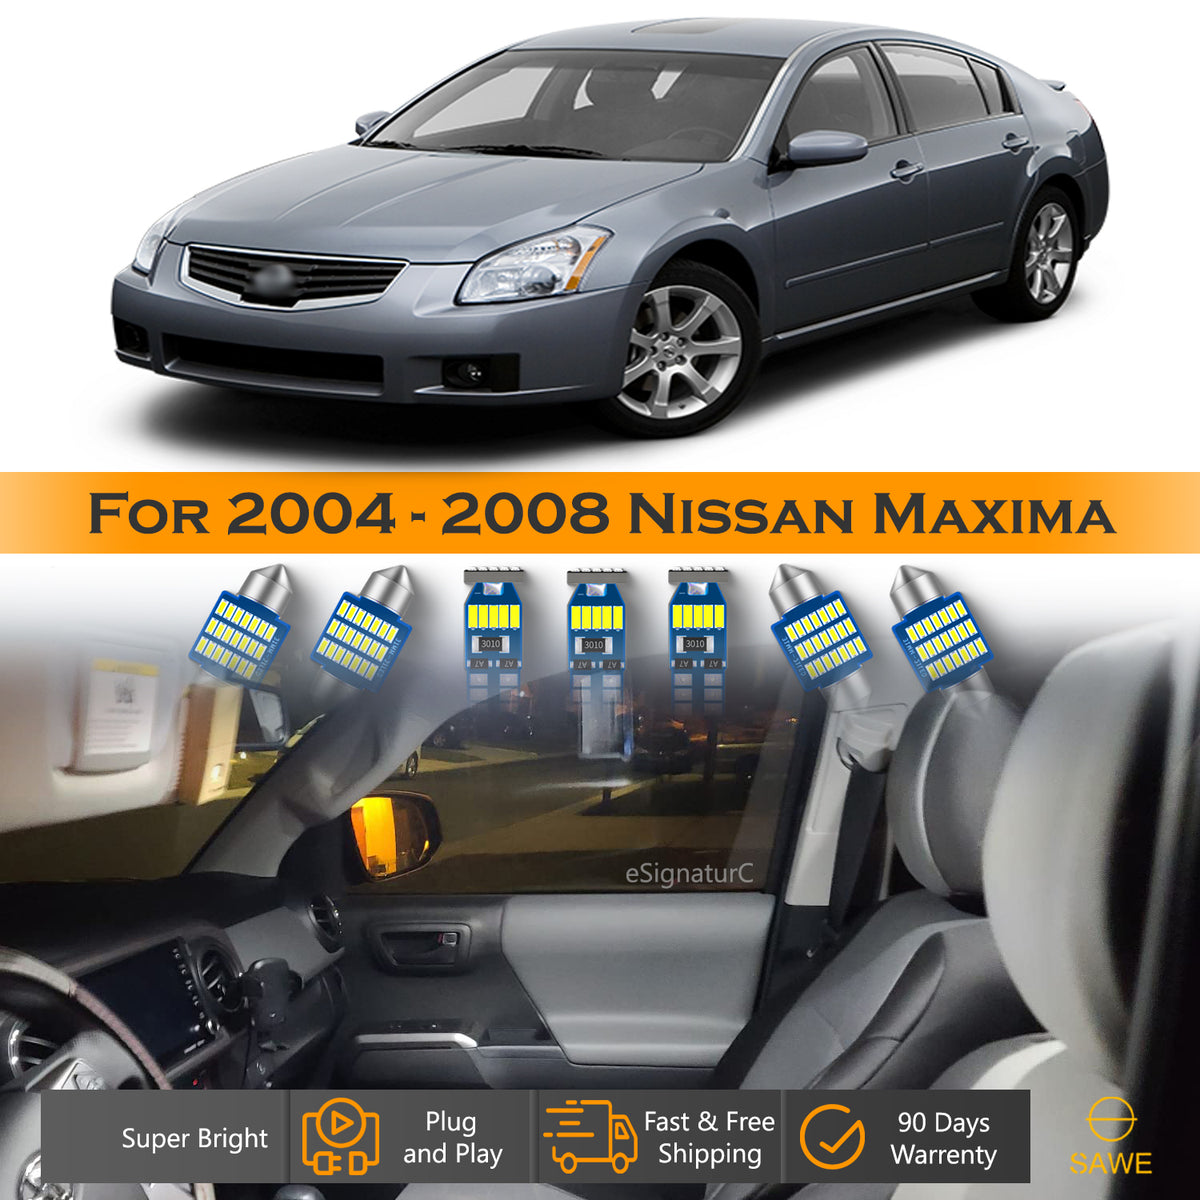 For Nissan Maxima Interior LED Lights - Dome & Map Light Bulbs Package Kit for 2004 - 2008 - White